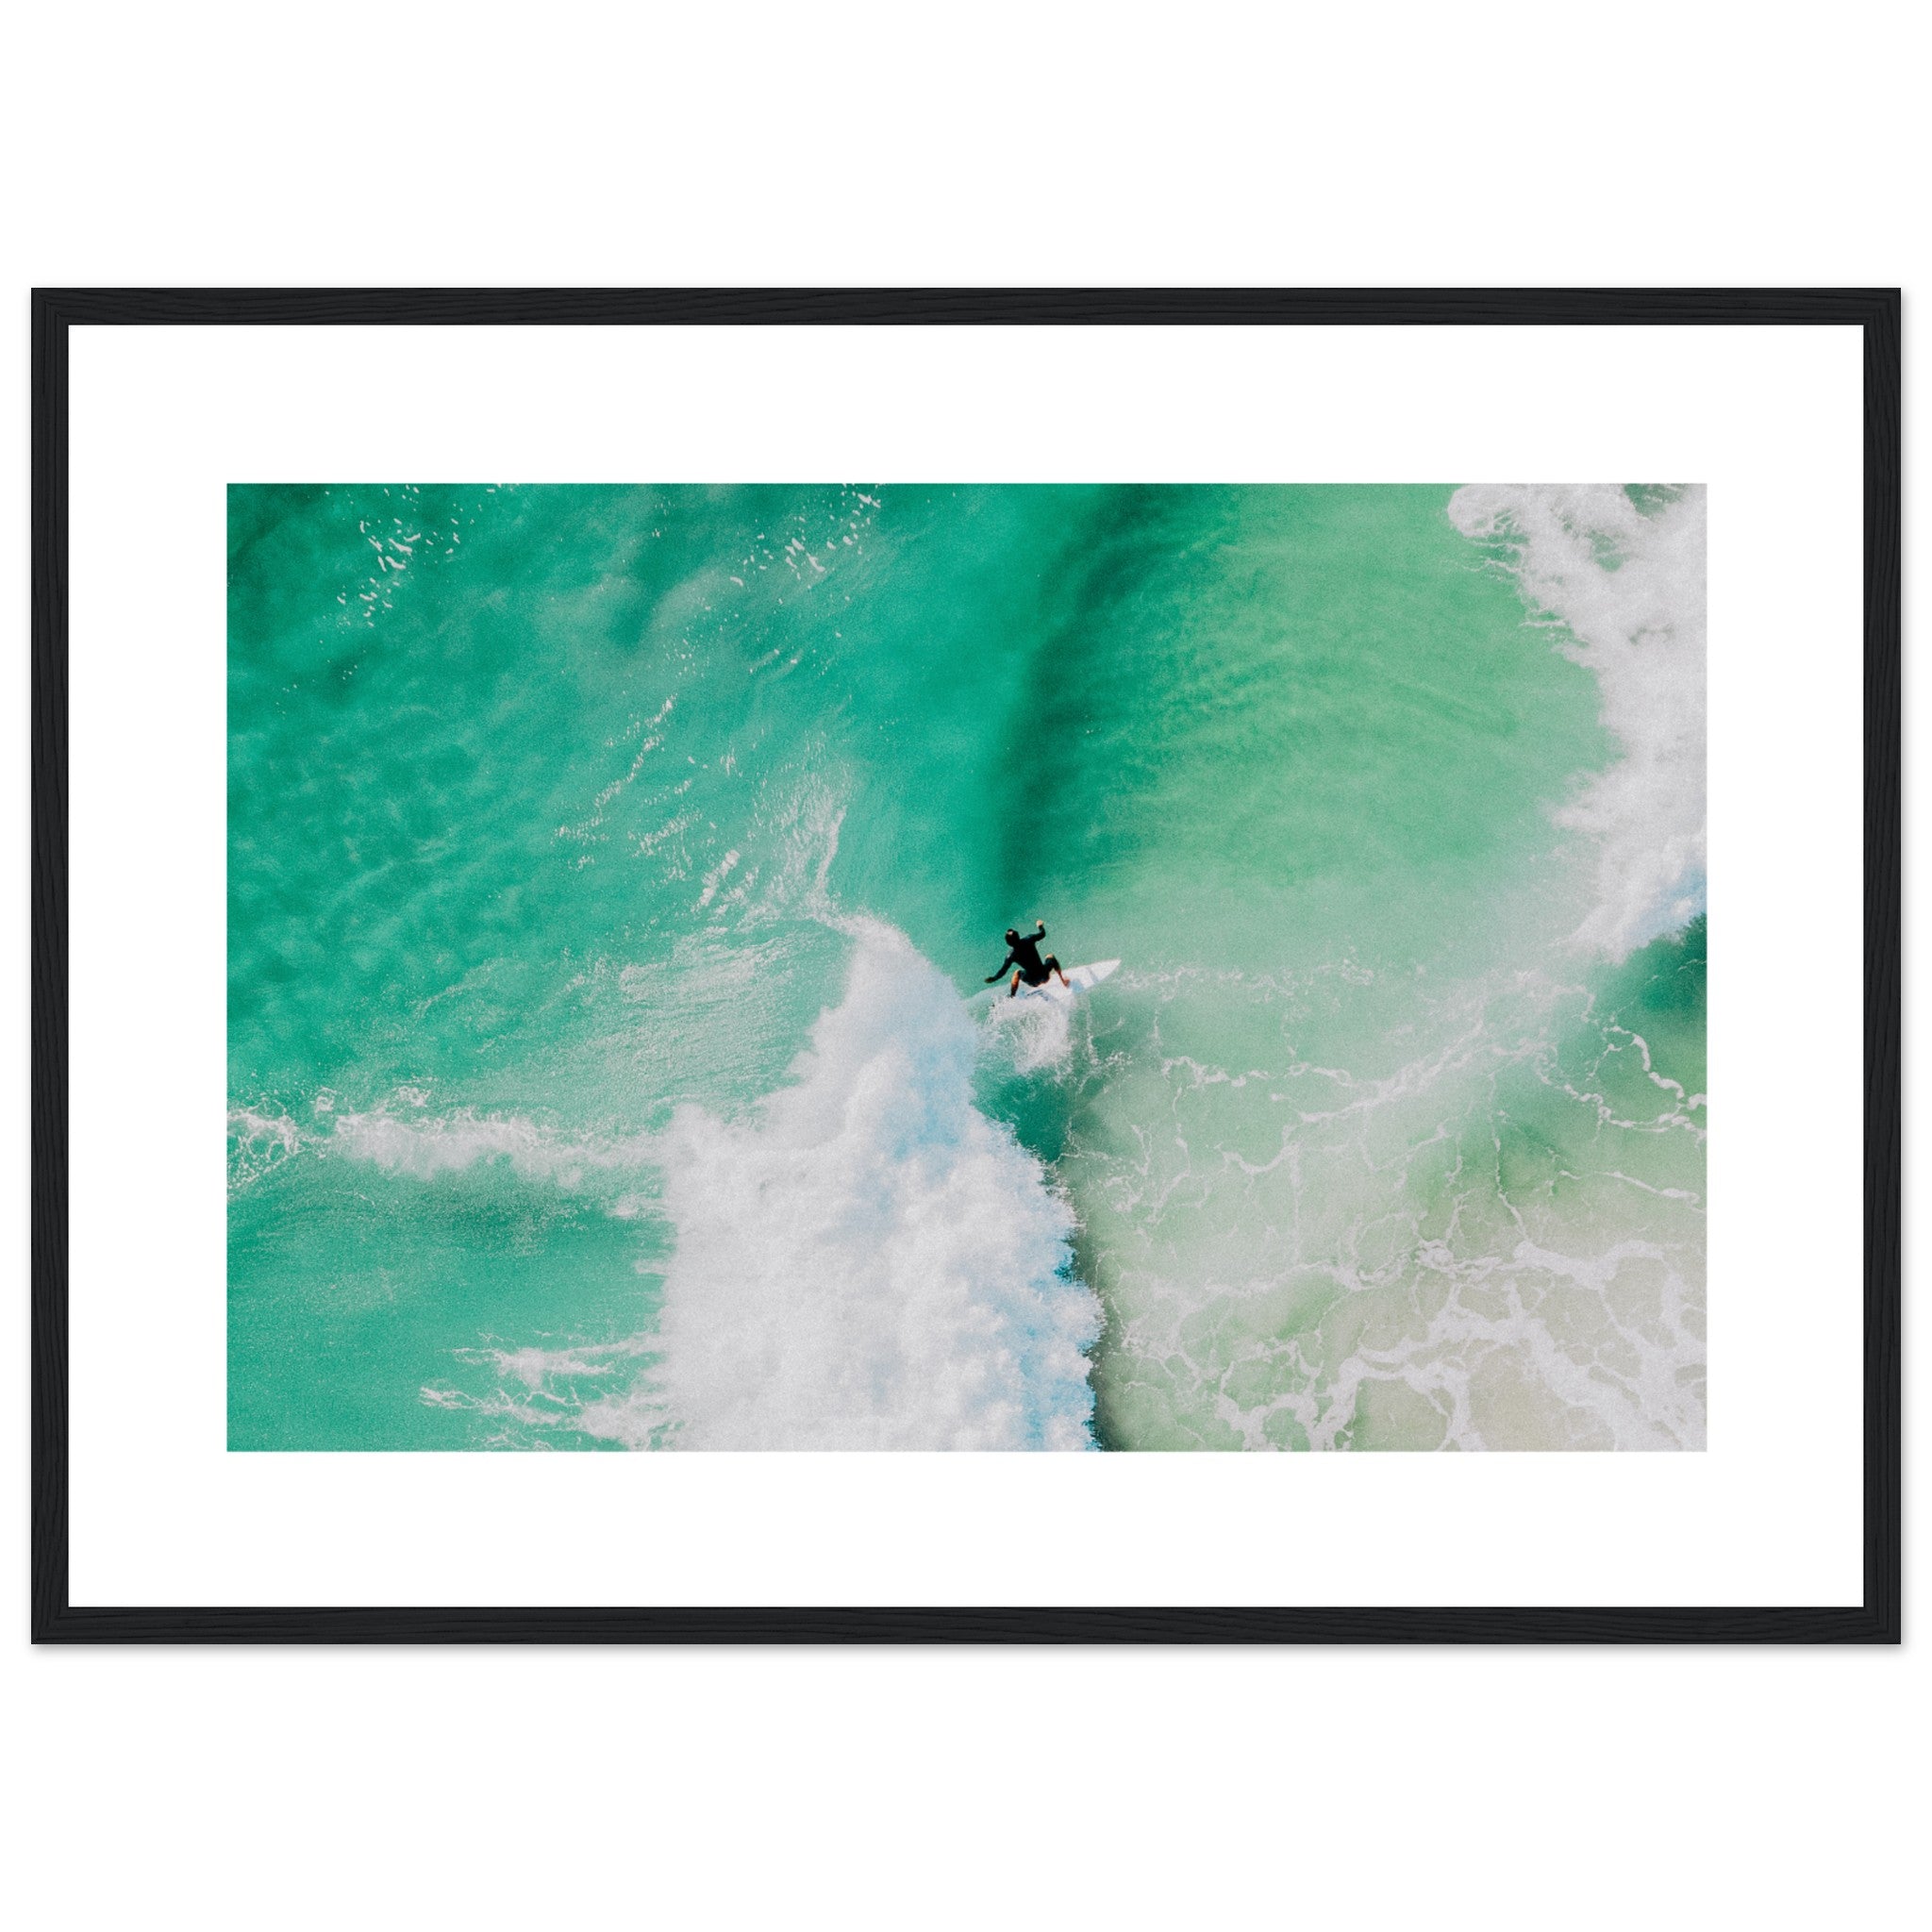 Riding Waves Poster